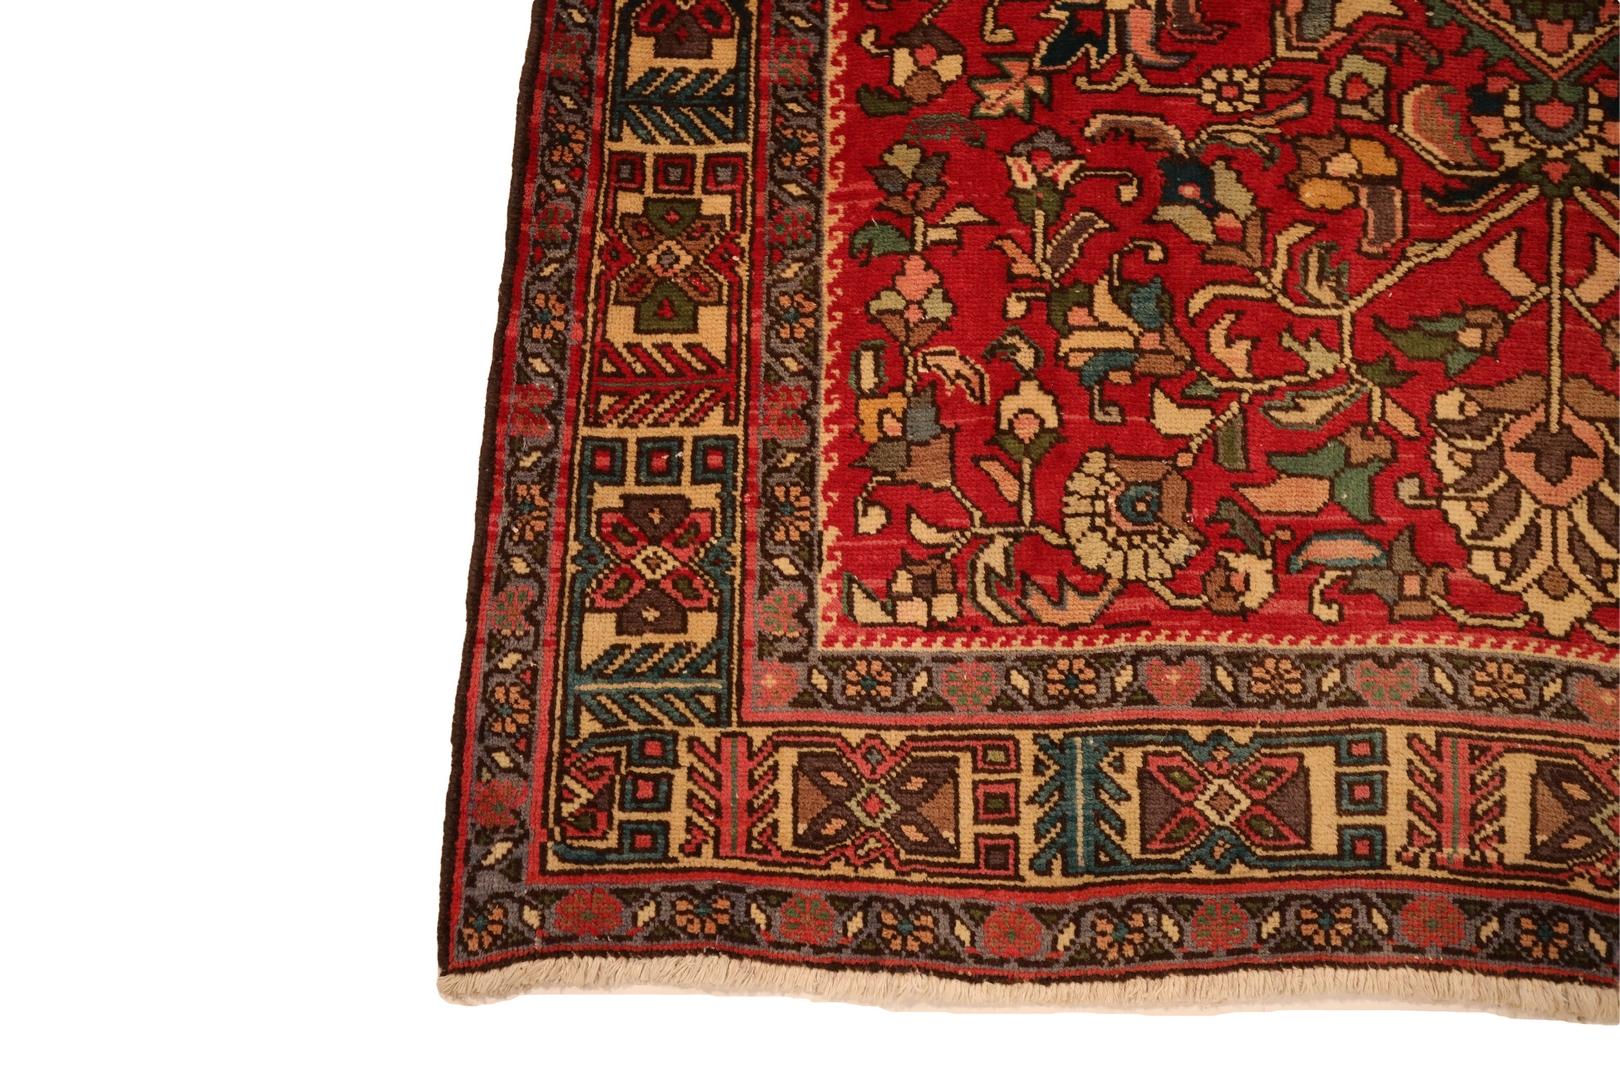 Introducing the Northwestern Persian Runner, a vibrant and captivating masterpiece that seamlessly blends tradition and artistry. This exquisite rug boasts a deep red background that immediately commands attention, creating a bold foundation for the